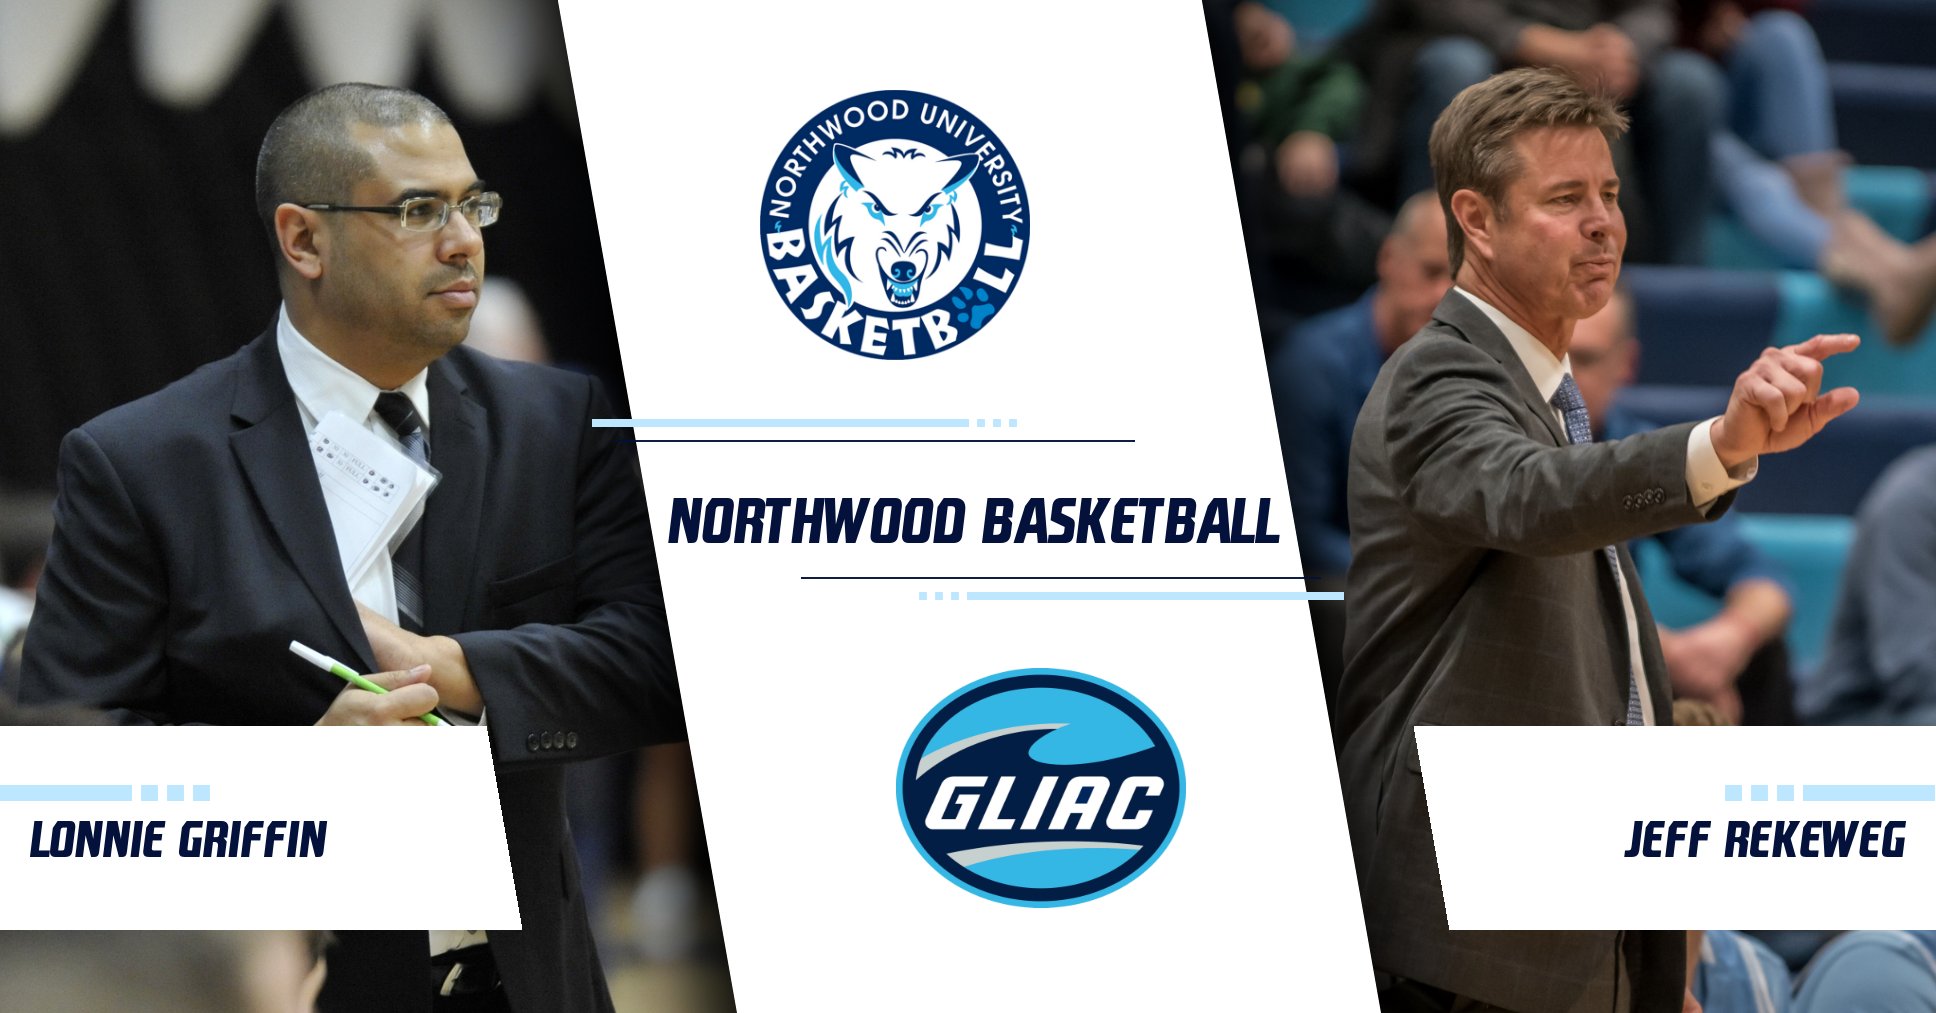 Jeff Rekeweg Takes New Position At Northwood - Lonnie Griffin Named Head Men's Basketball Coach